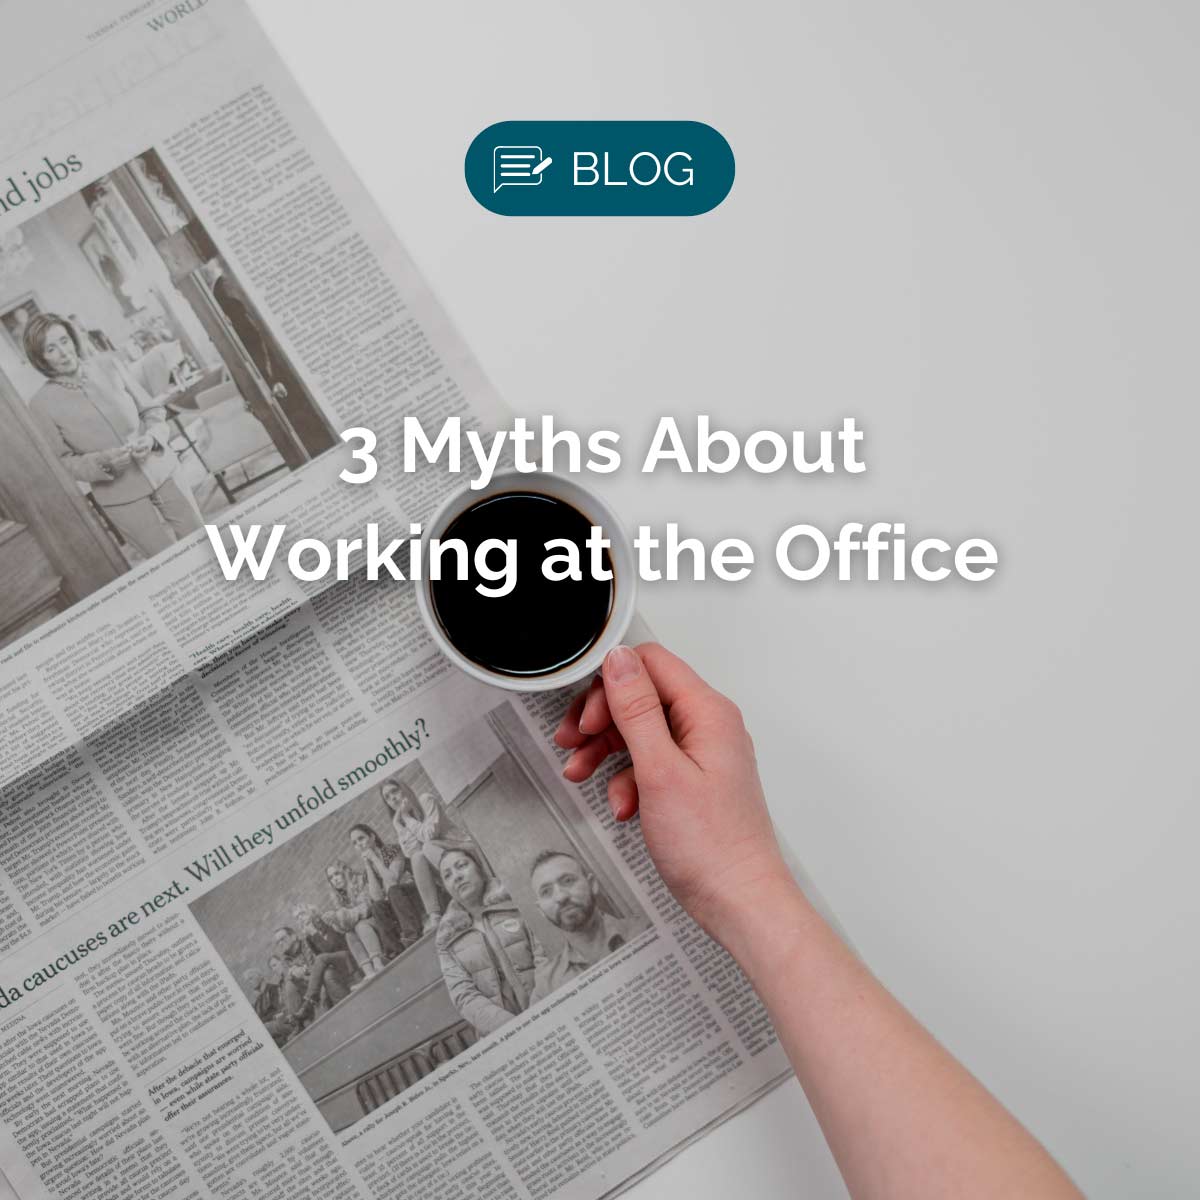 Myths about Office Work